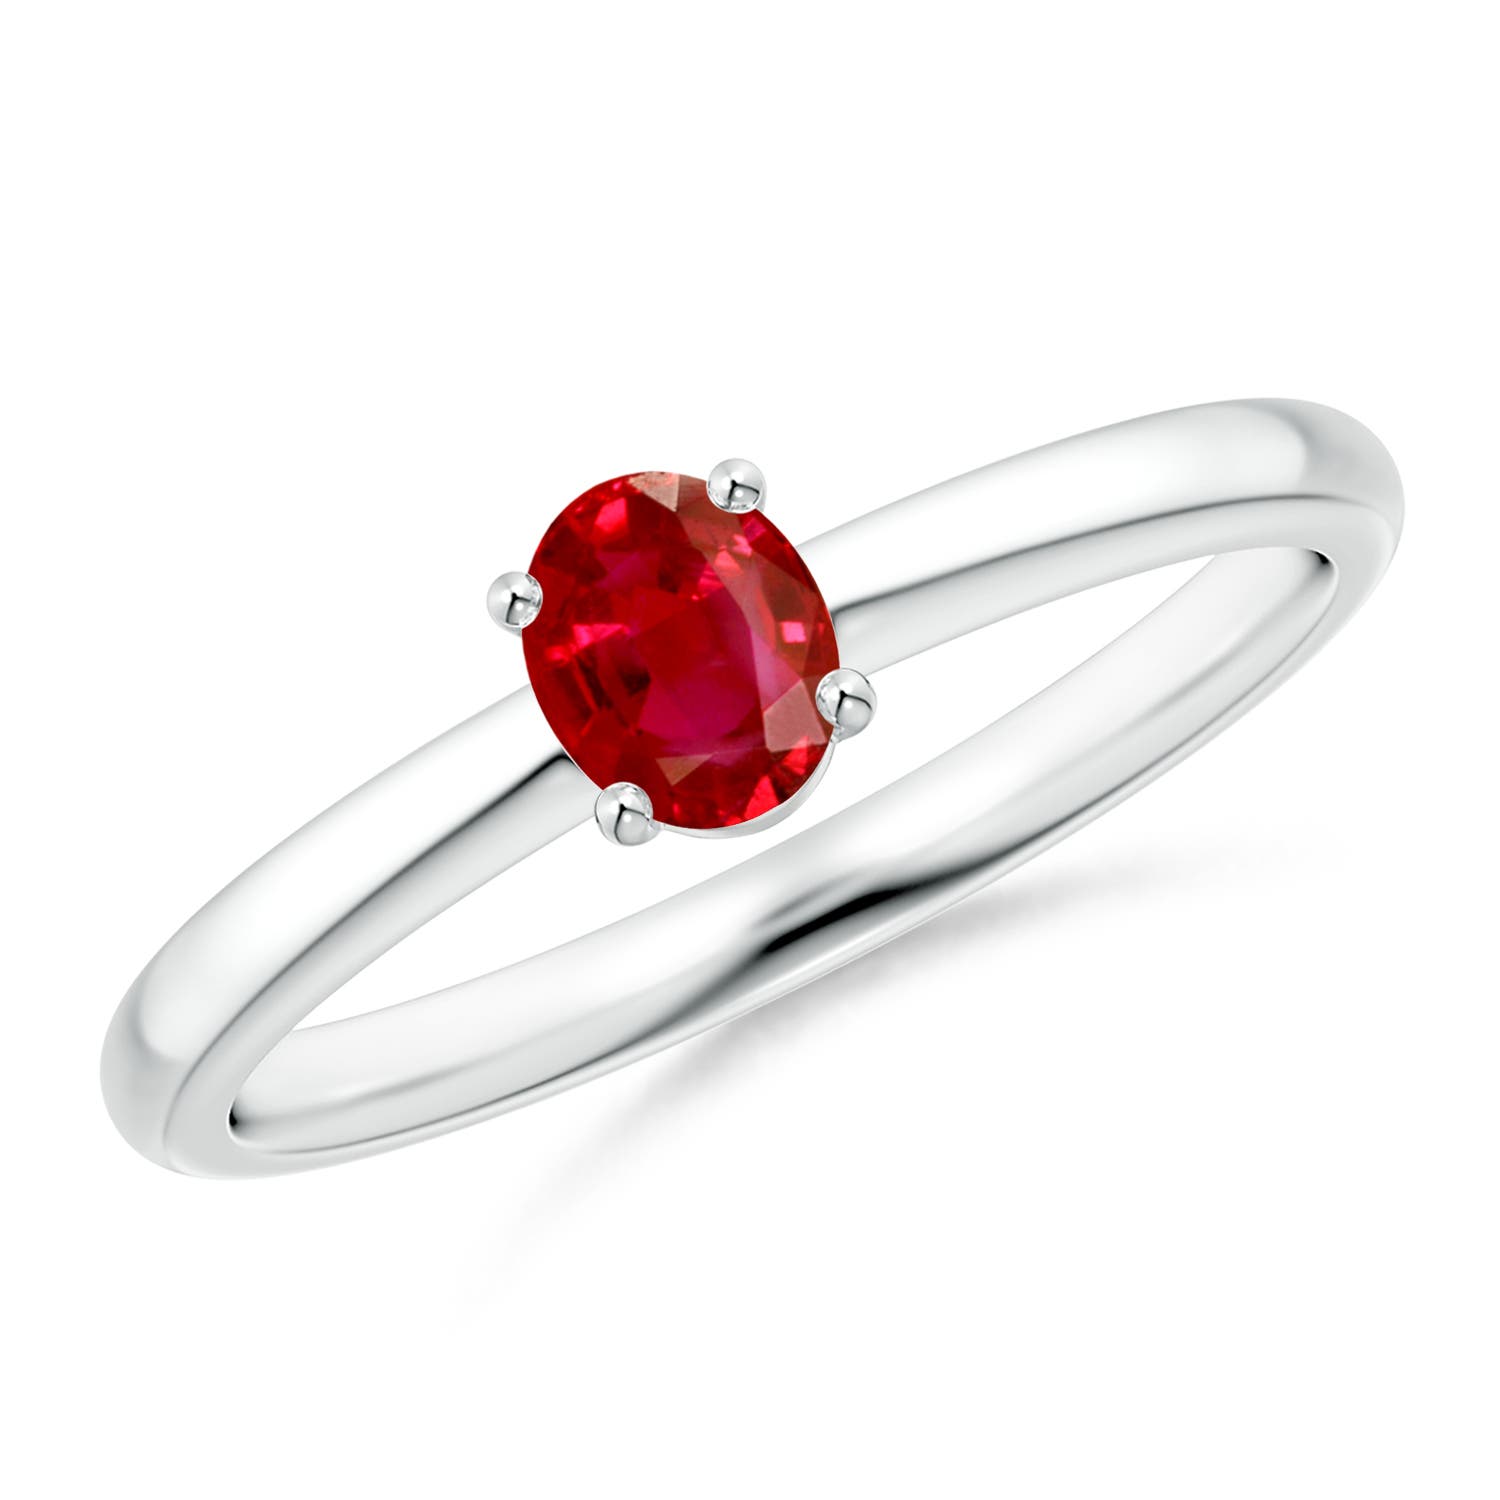 AAA - Ruby / 0.4 CT / 14 KT White Gold